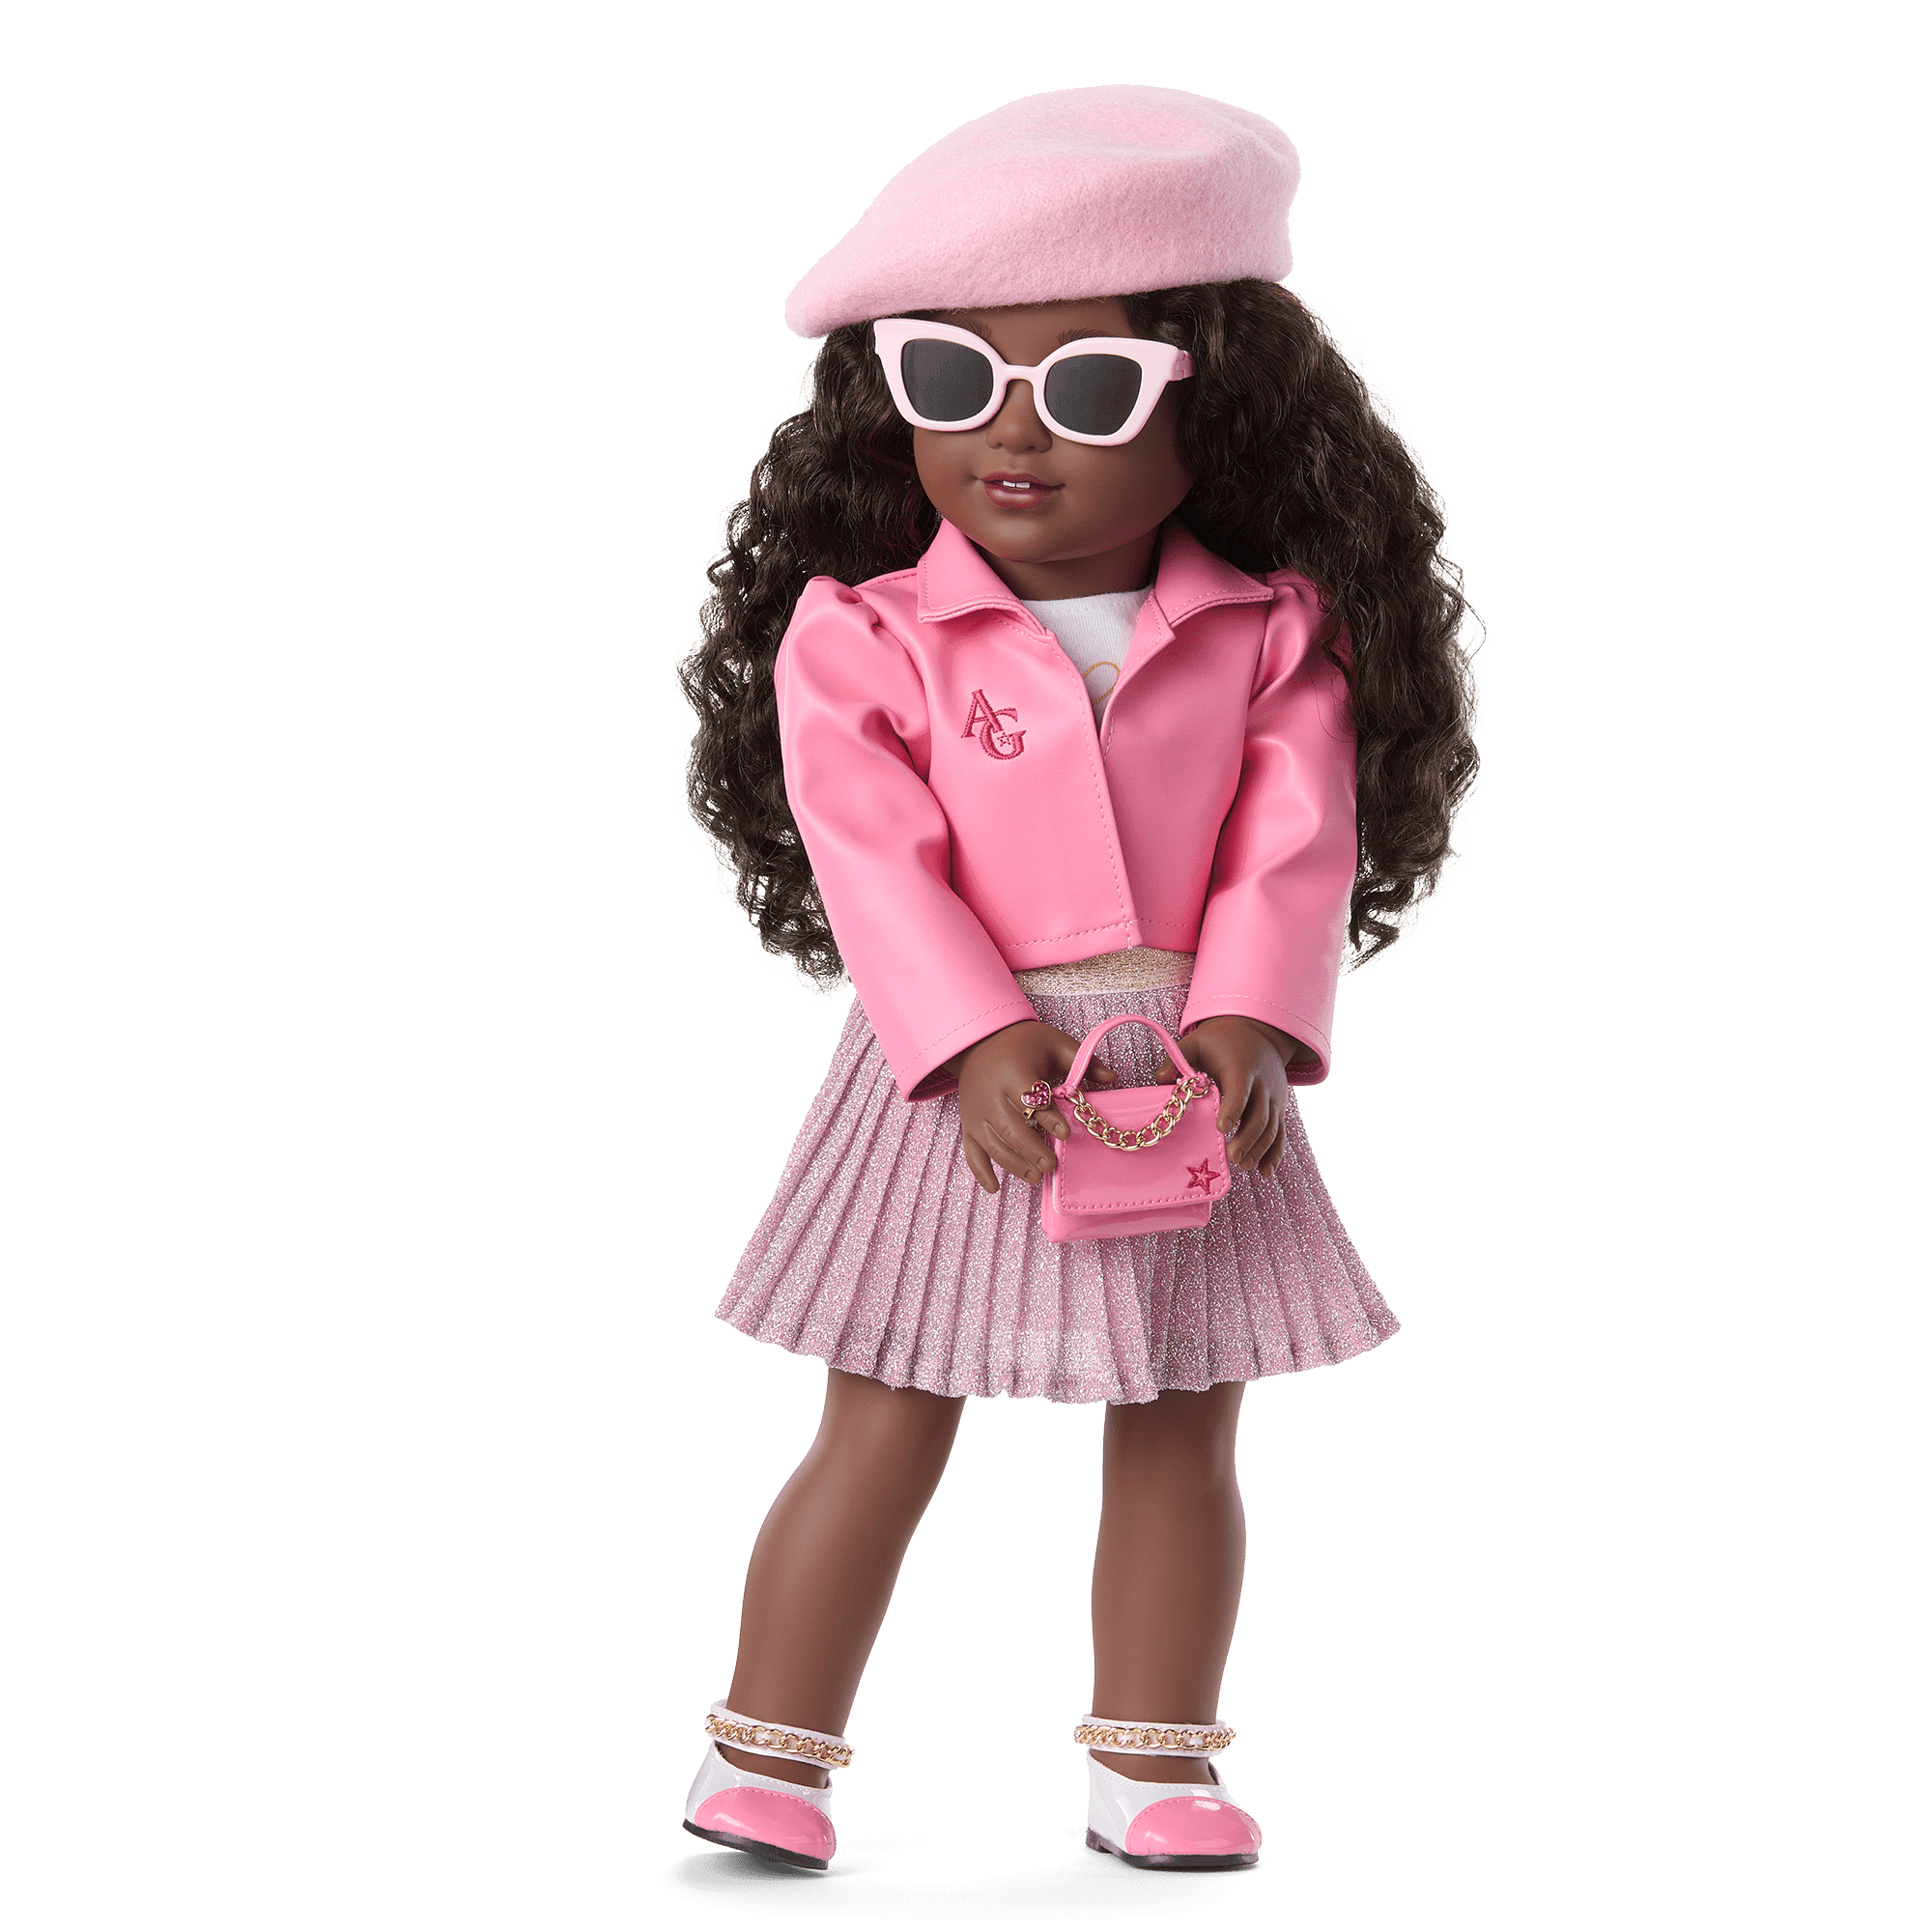 Pink Chic Accessories for 18-inch Dolls